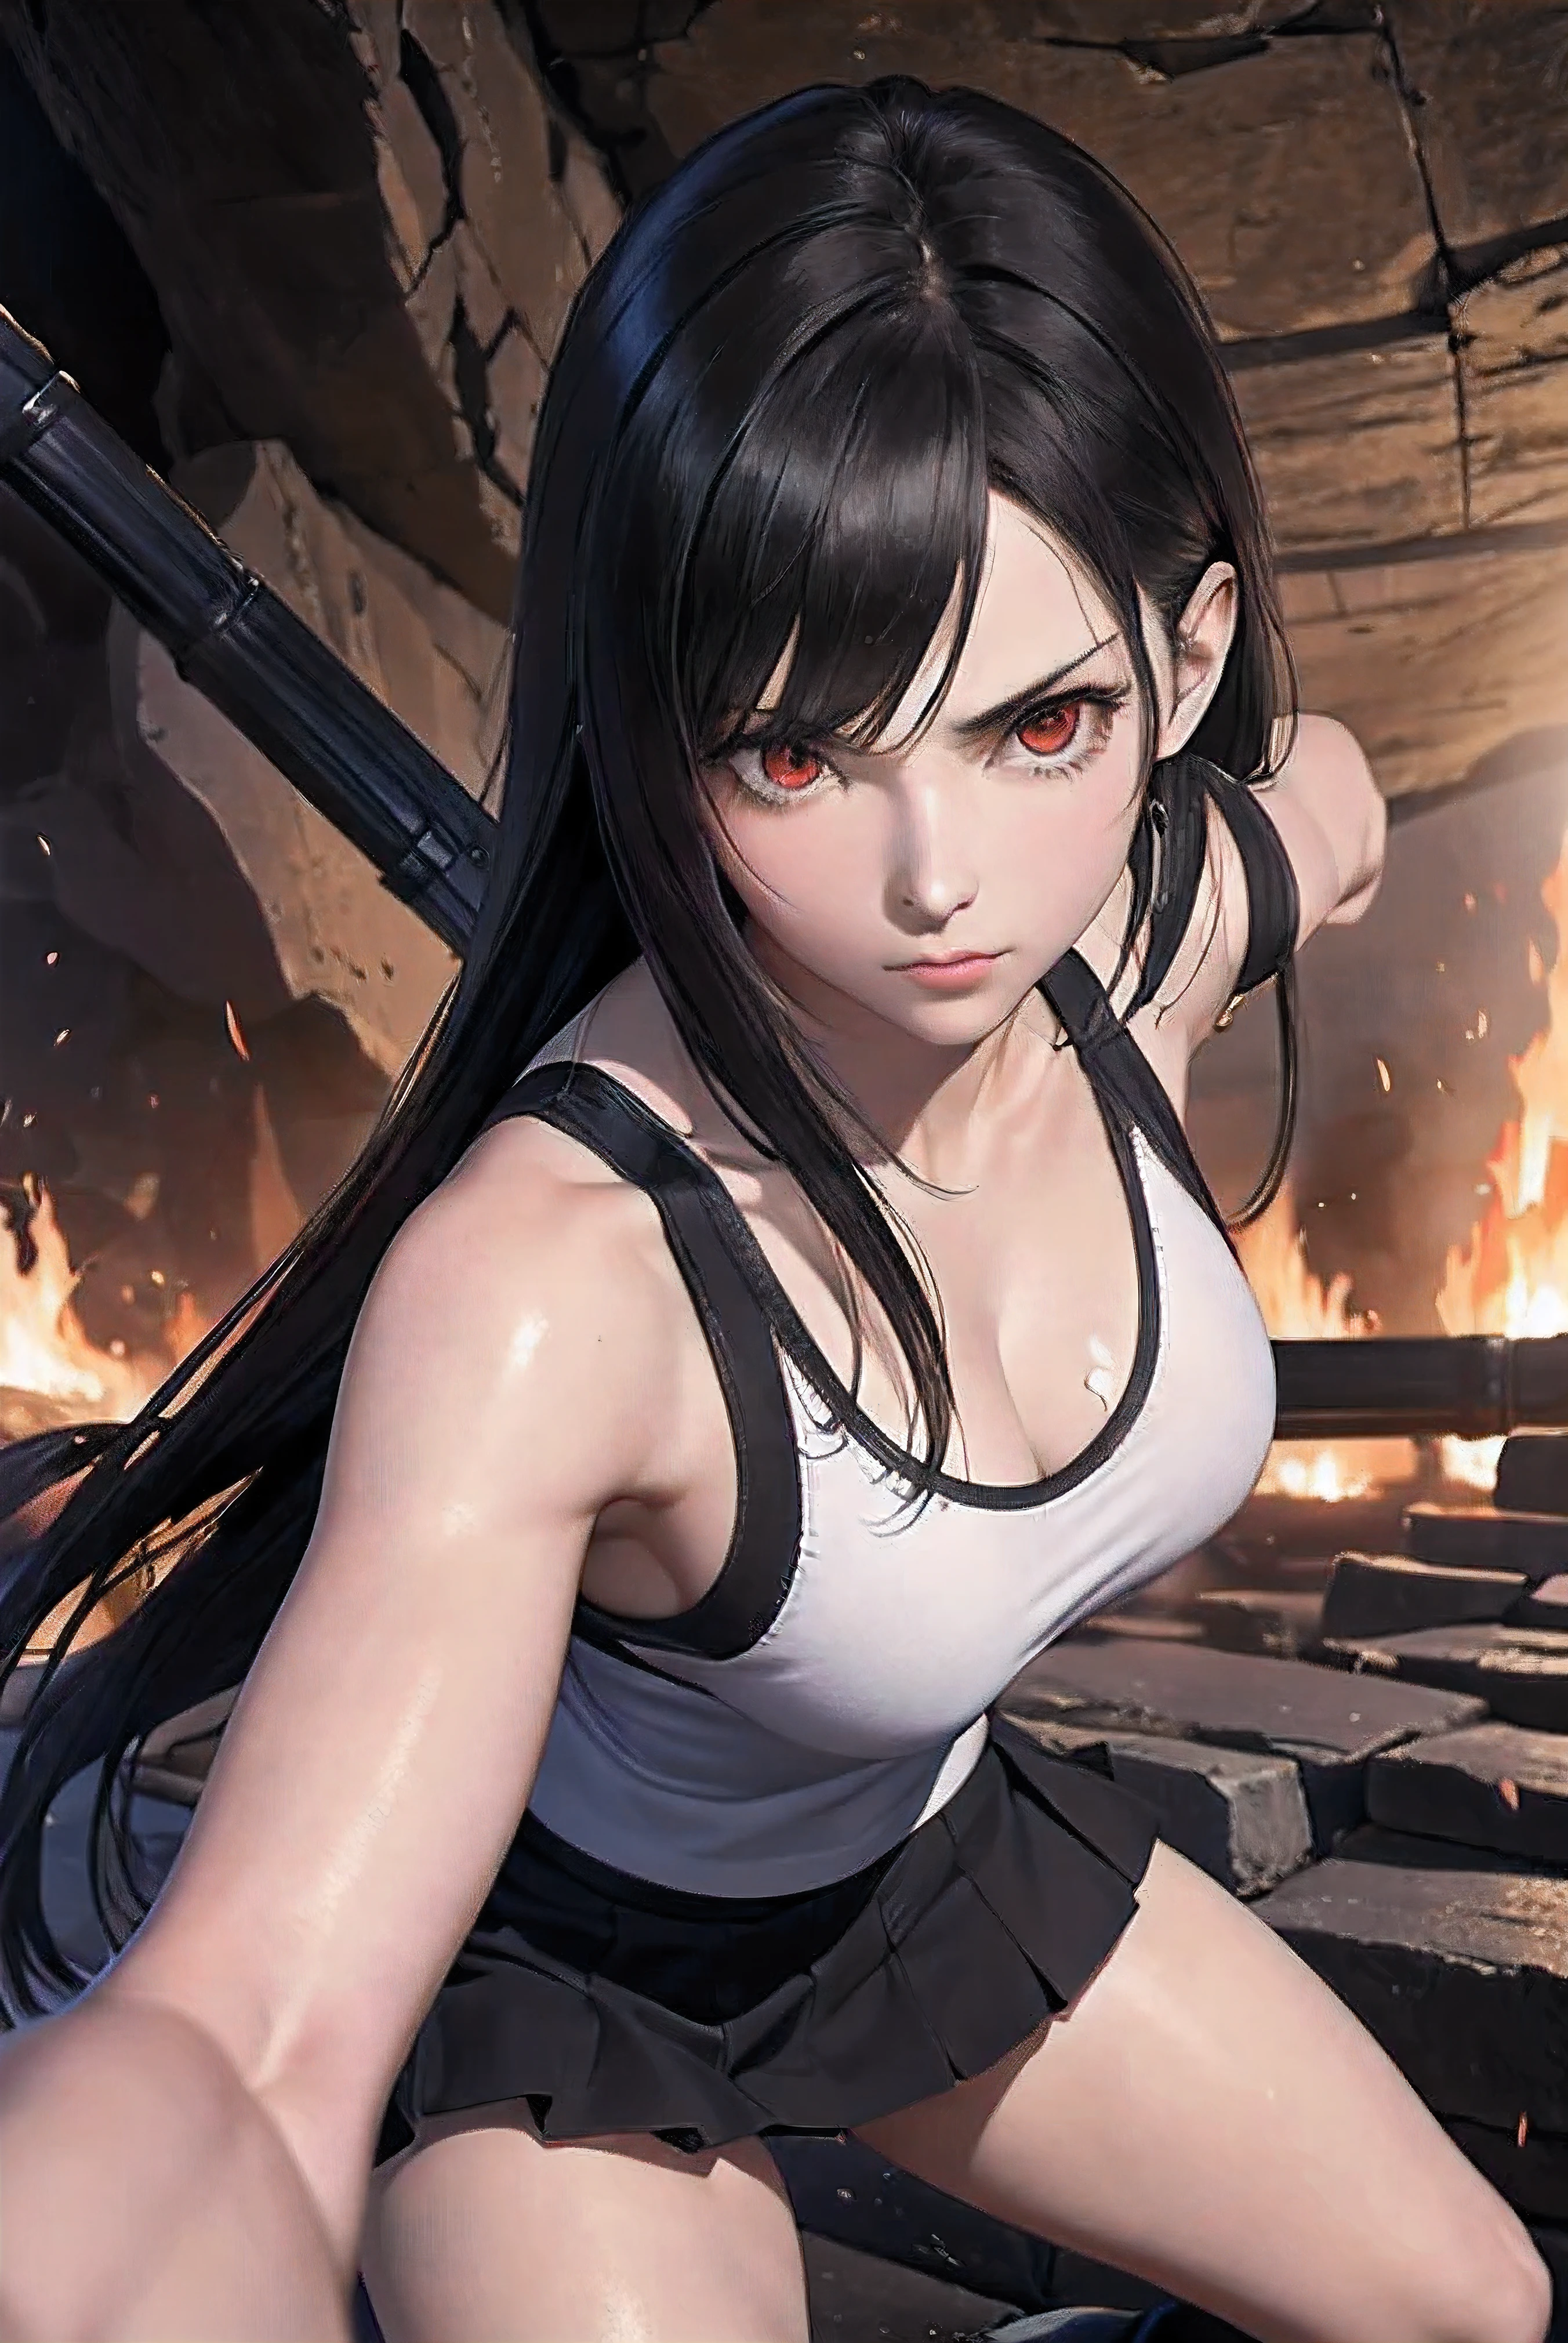 white tank top with black trim and black skirt, inside the cave, black long hair, the girl has really red eyes, tifa lockhart, The girl is 16 years old, beautiful skin, realistic anime, anime realism style, Output in 8K, highest quality,Natural light, professional lighting, shiny skin, silky skin, bonfire lighting, Looking over there, fighting pose, Fight monsters, Girl vs Monster, Moonsault Kick